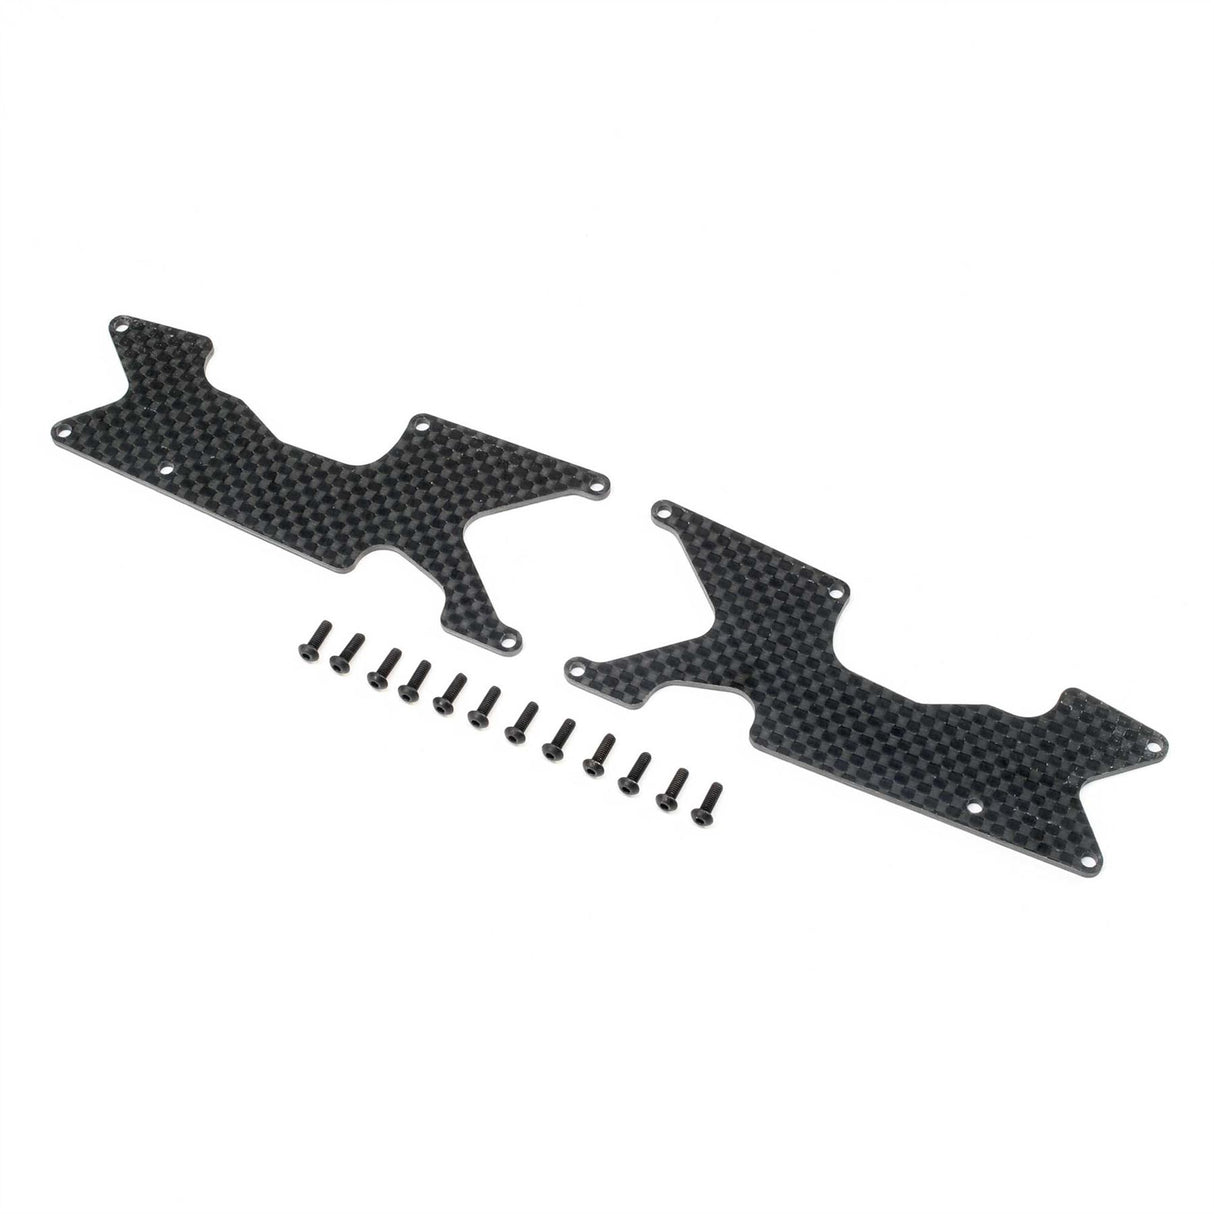 TLR Rear Arm Inserts, Carbon: 8XT